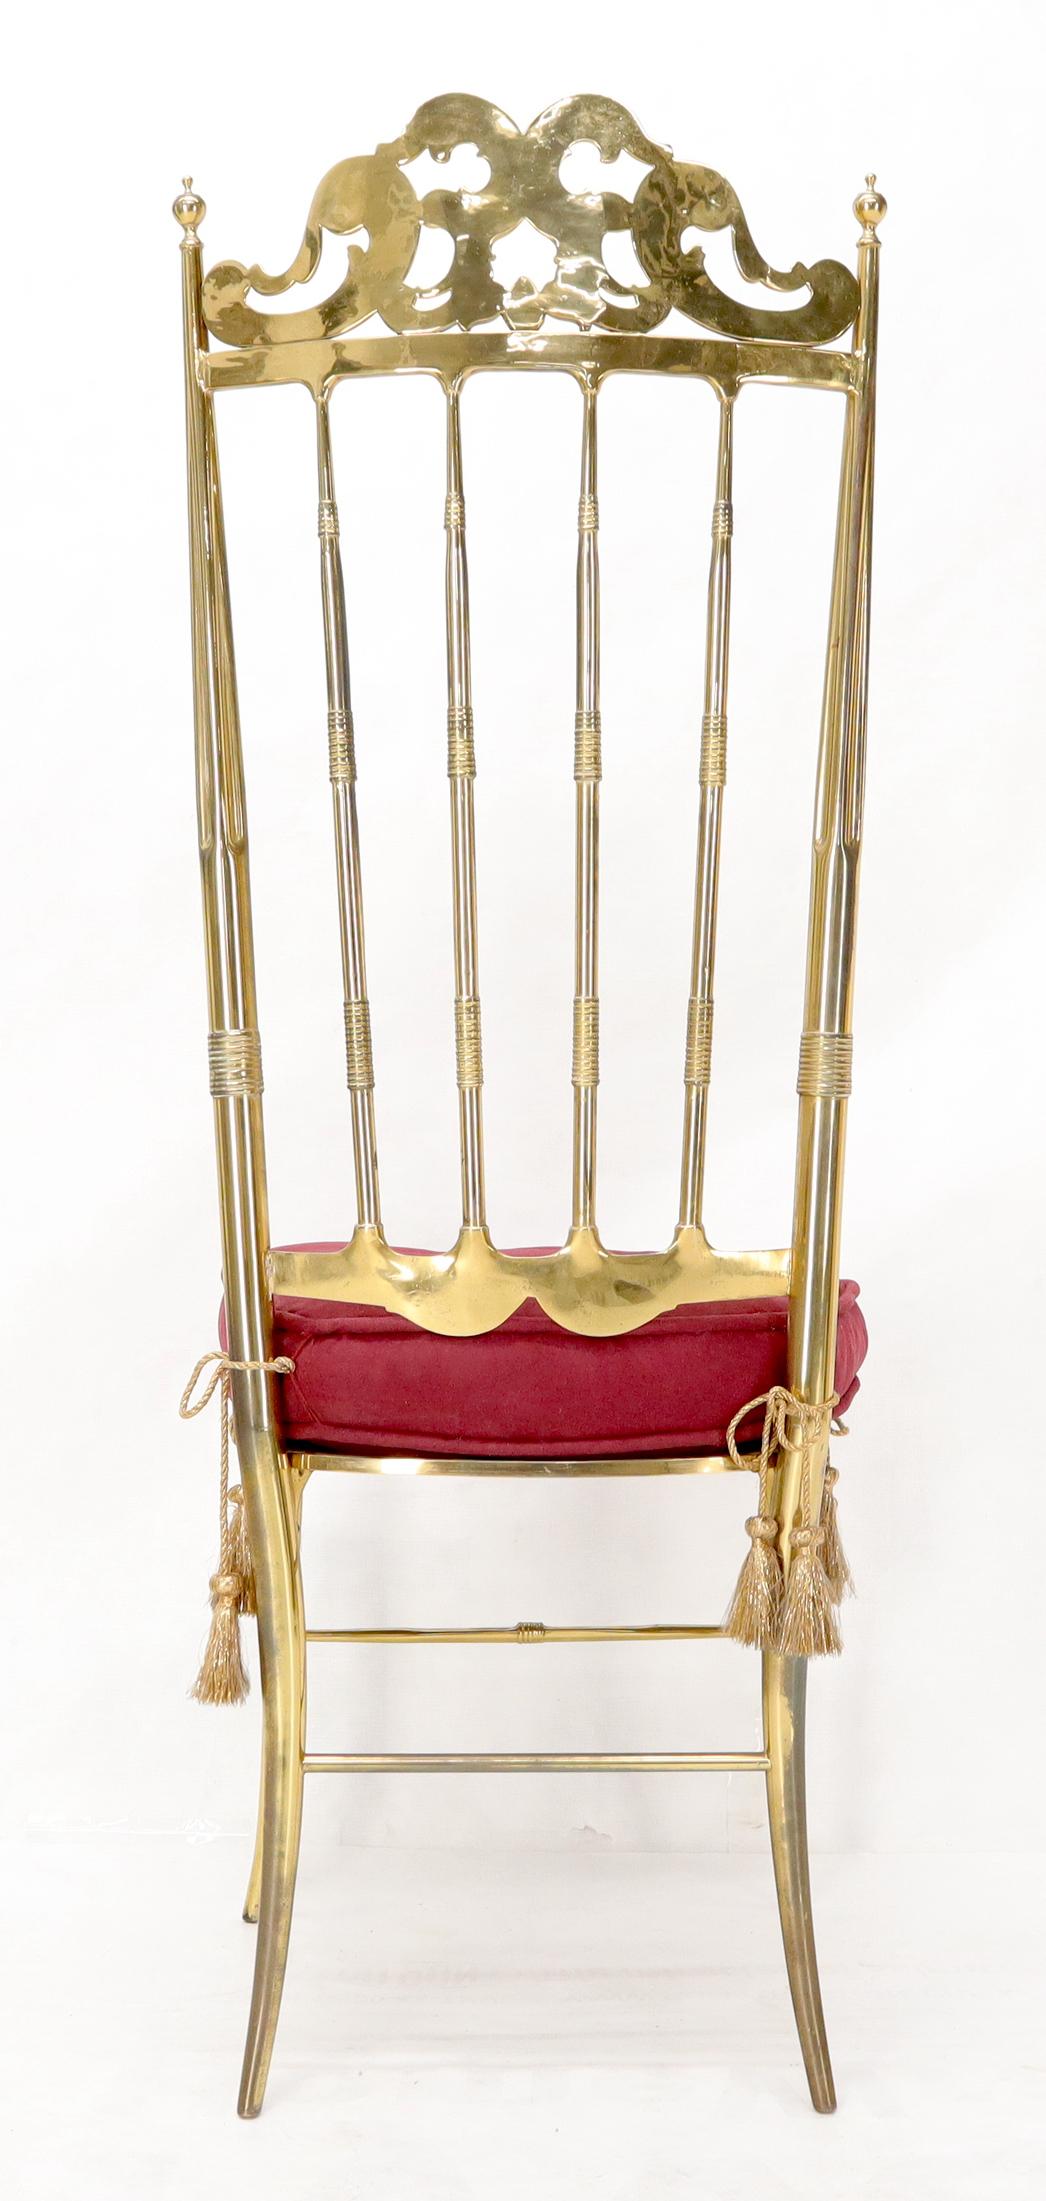 Set of 2 Italian Solid Brass Chiavari Chairs from 1950s Salmon Red Upholstery In Good Condition For Sale In Rockaway, NJ